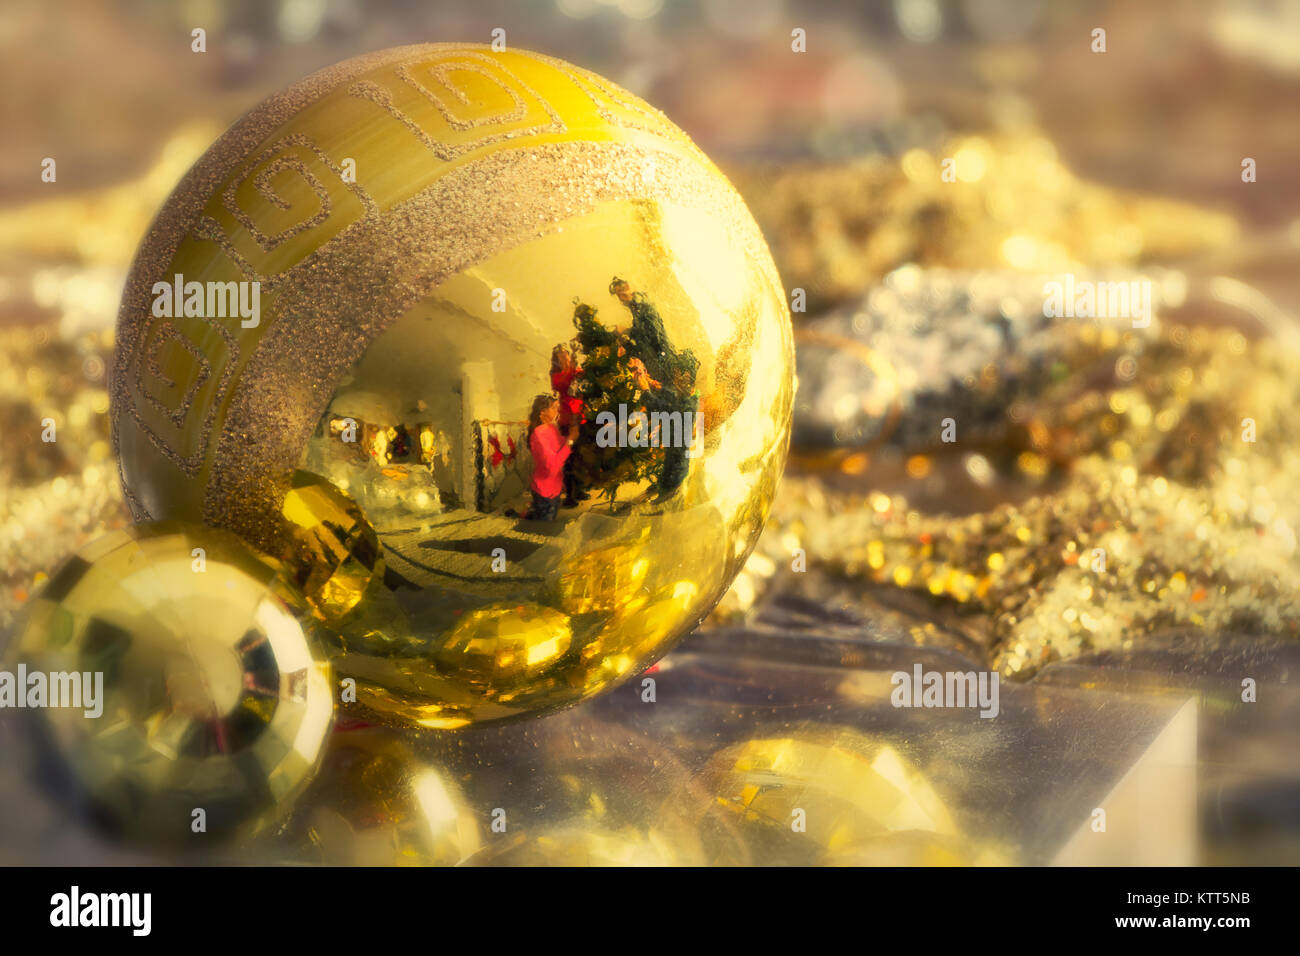 Reflection of a family decorating a Christmas tree in a bauble Stock Photo